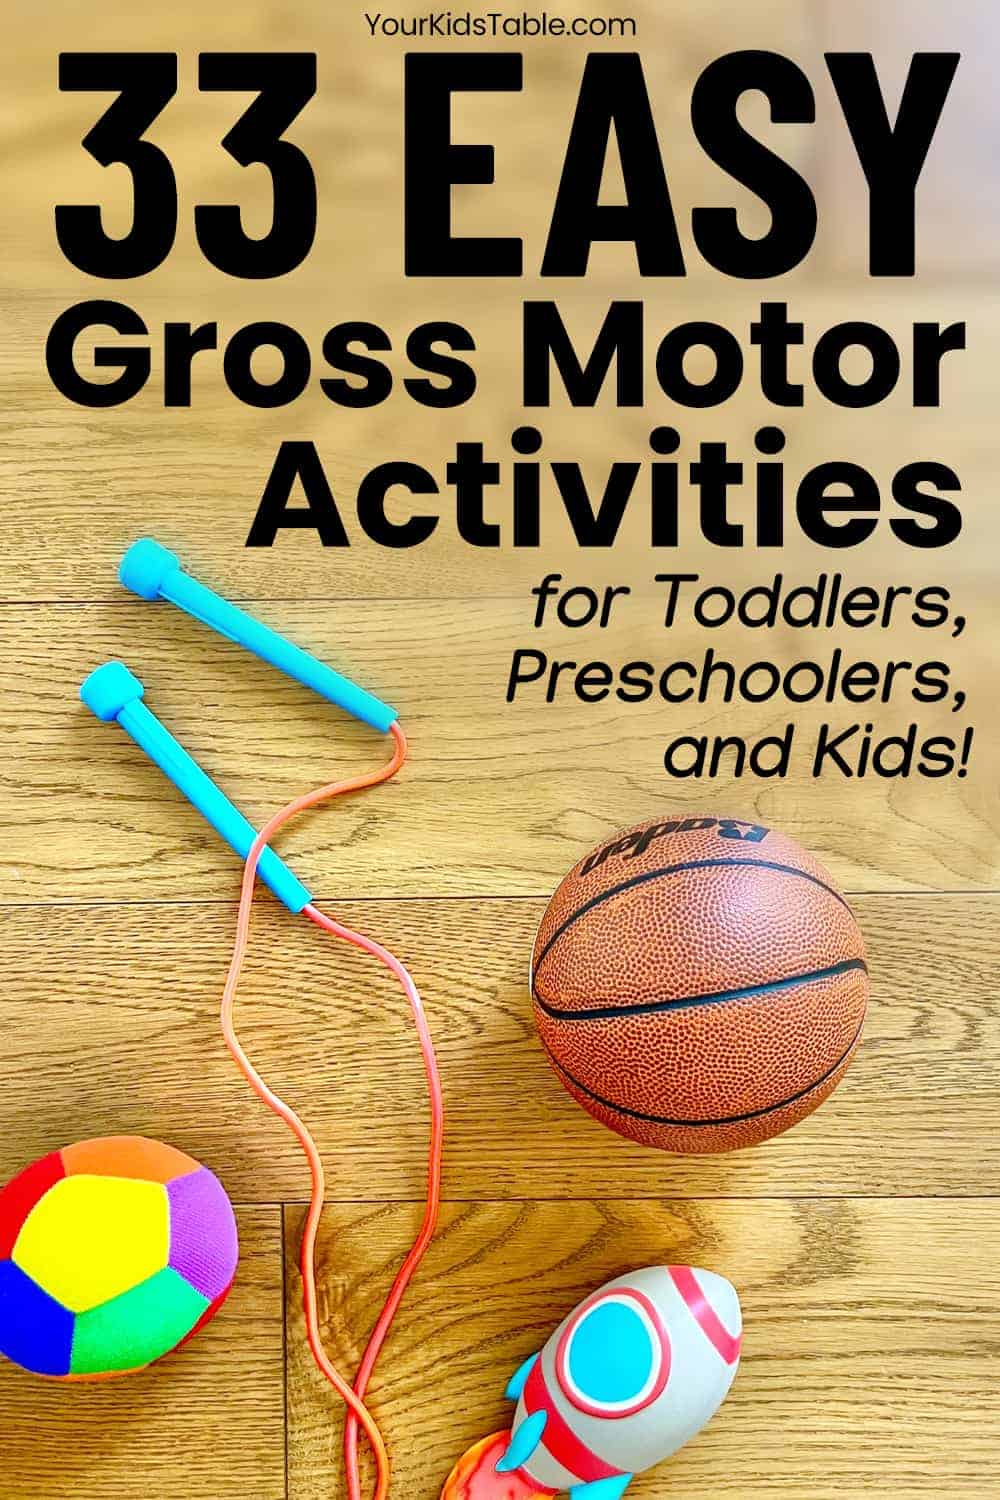 Your kids will love these gross motor skill activities, for toddlers, preschoolers, kindergarten or school aged. Plus, benefits of gross motor activities. Tons of ideas to try for large motor!